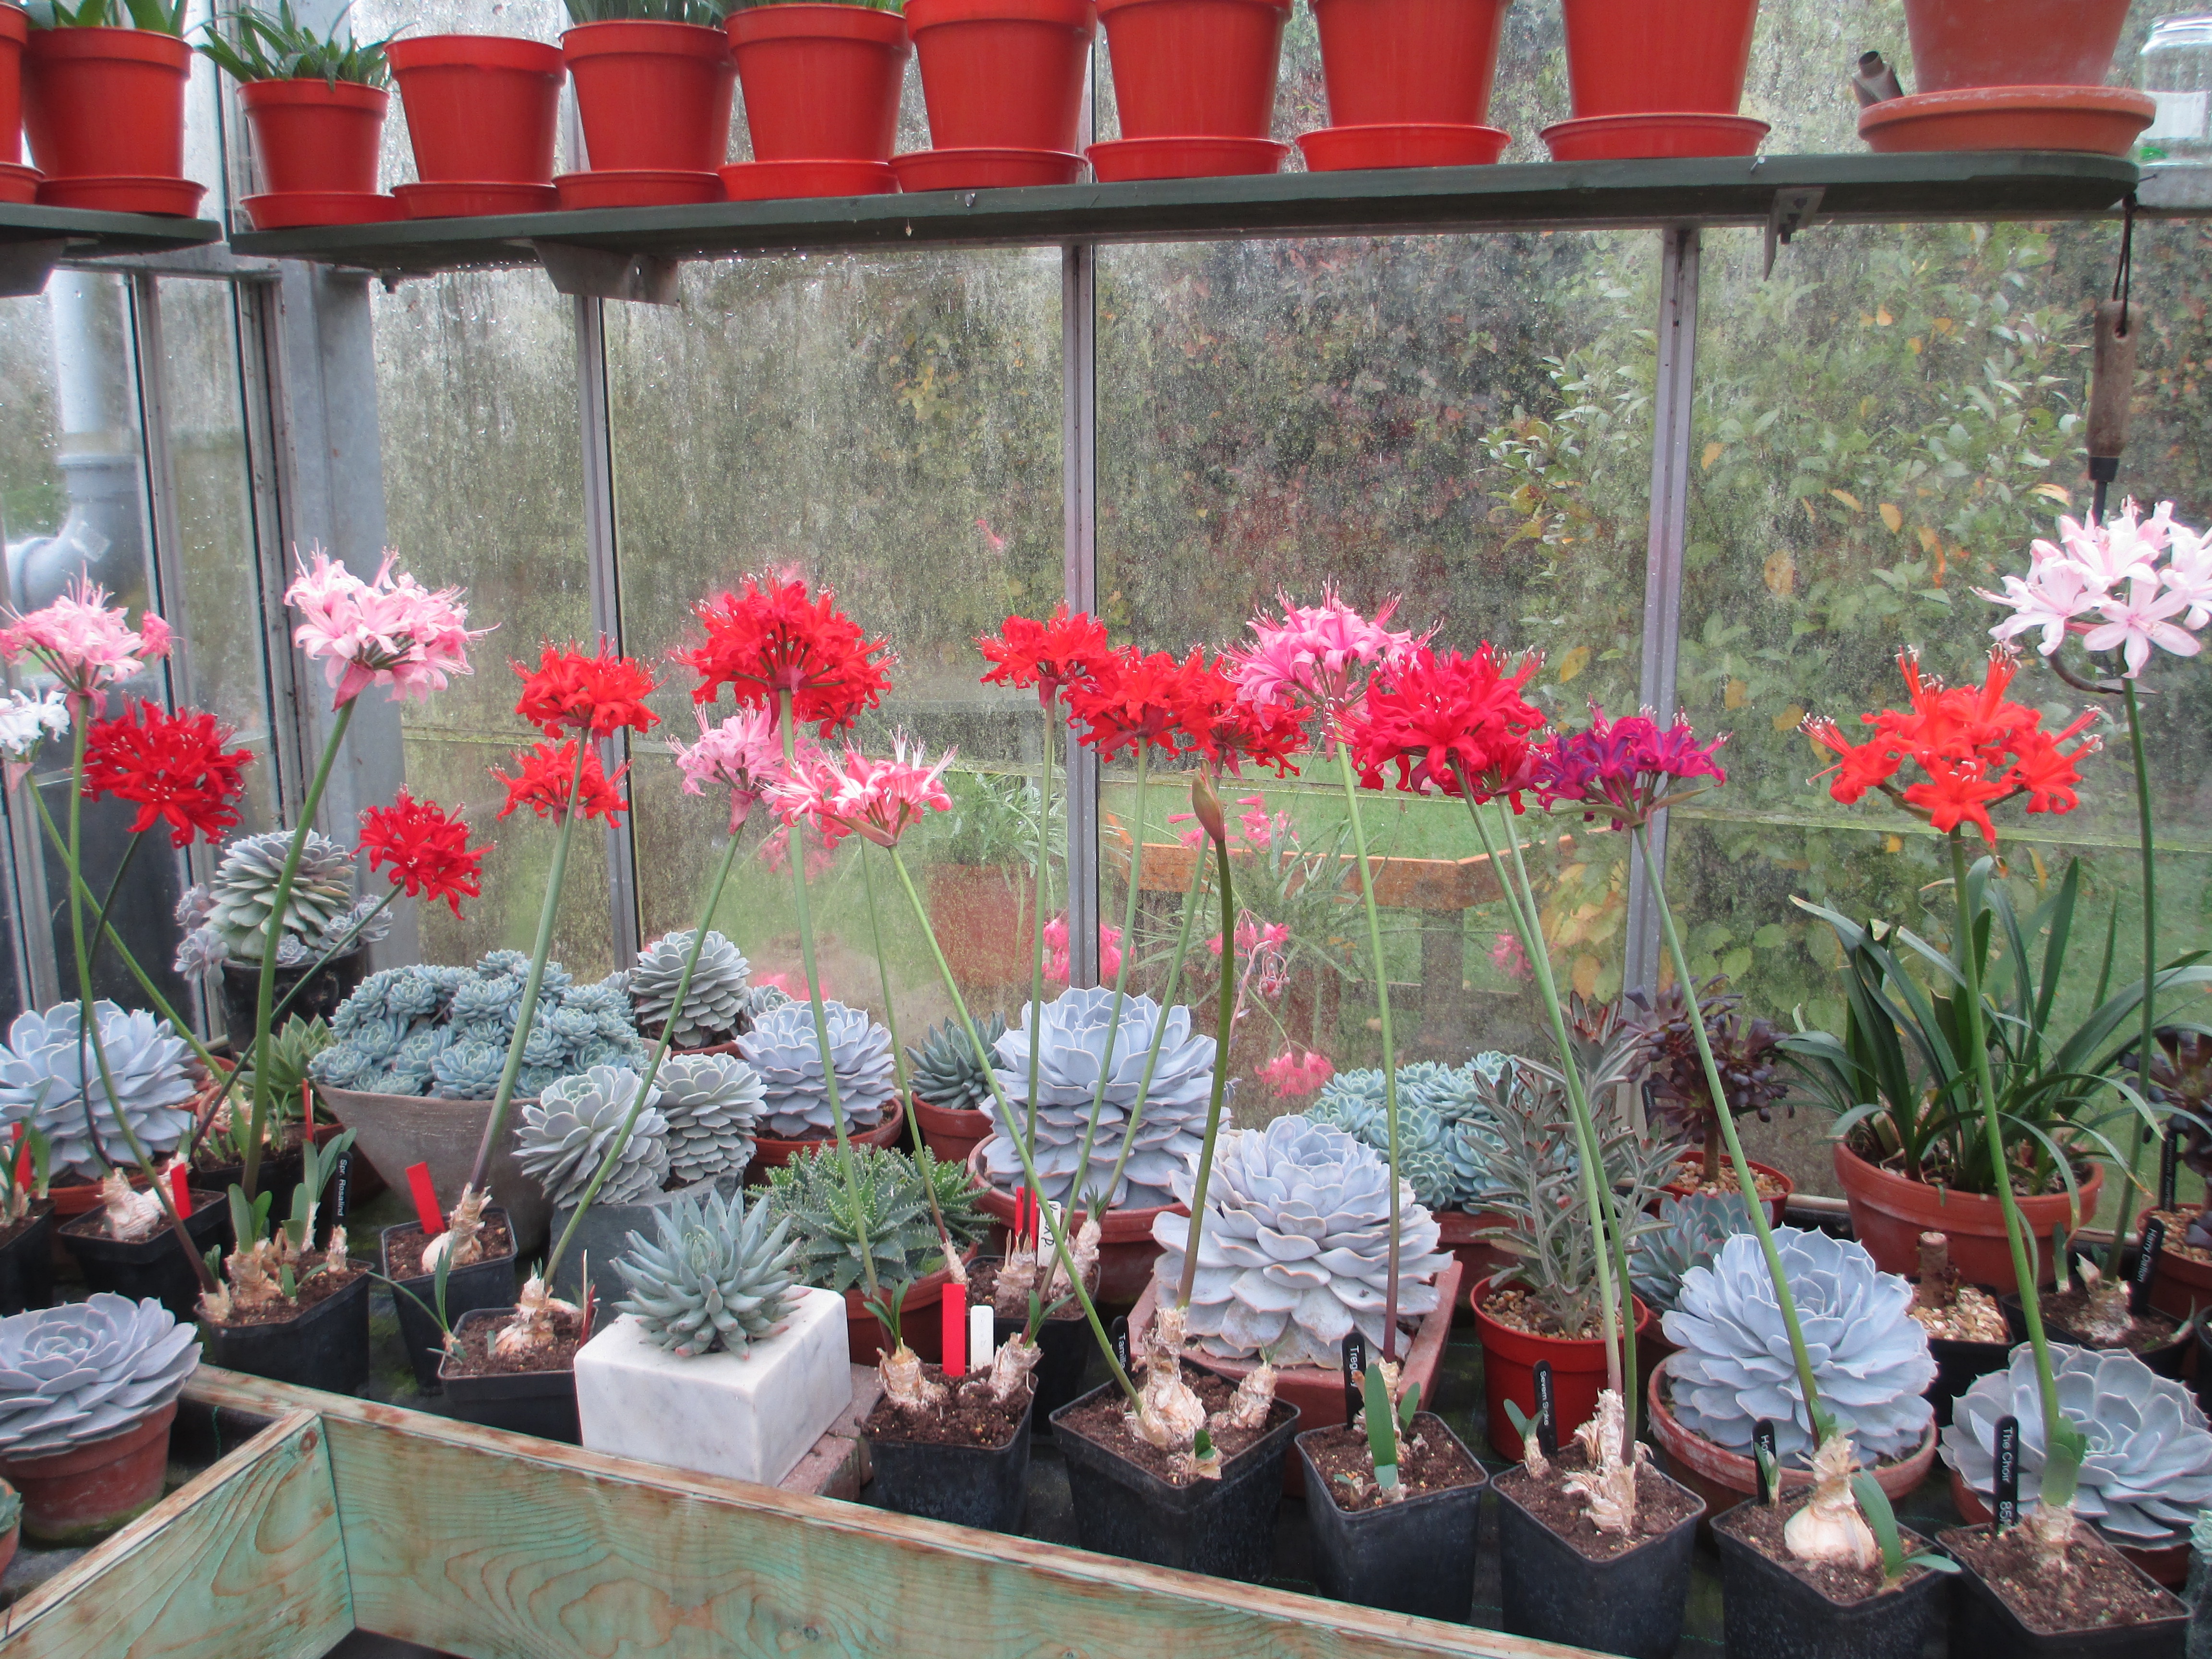 A carefully arranged display in a corner of the glasshouse.